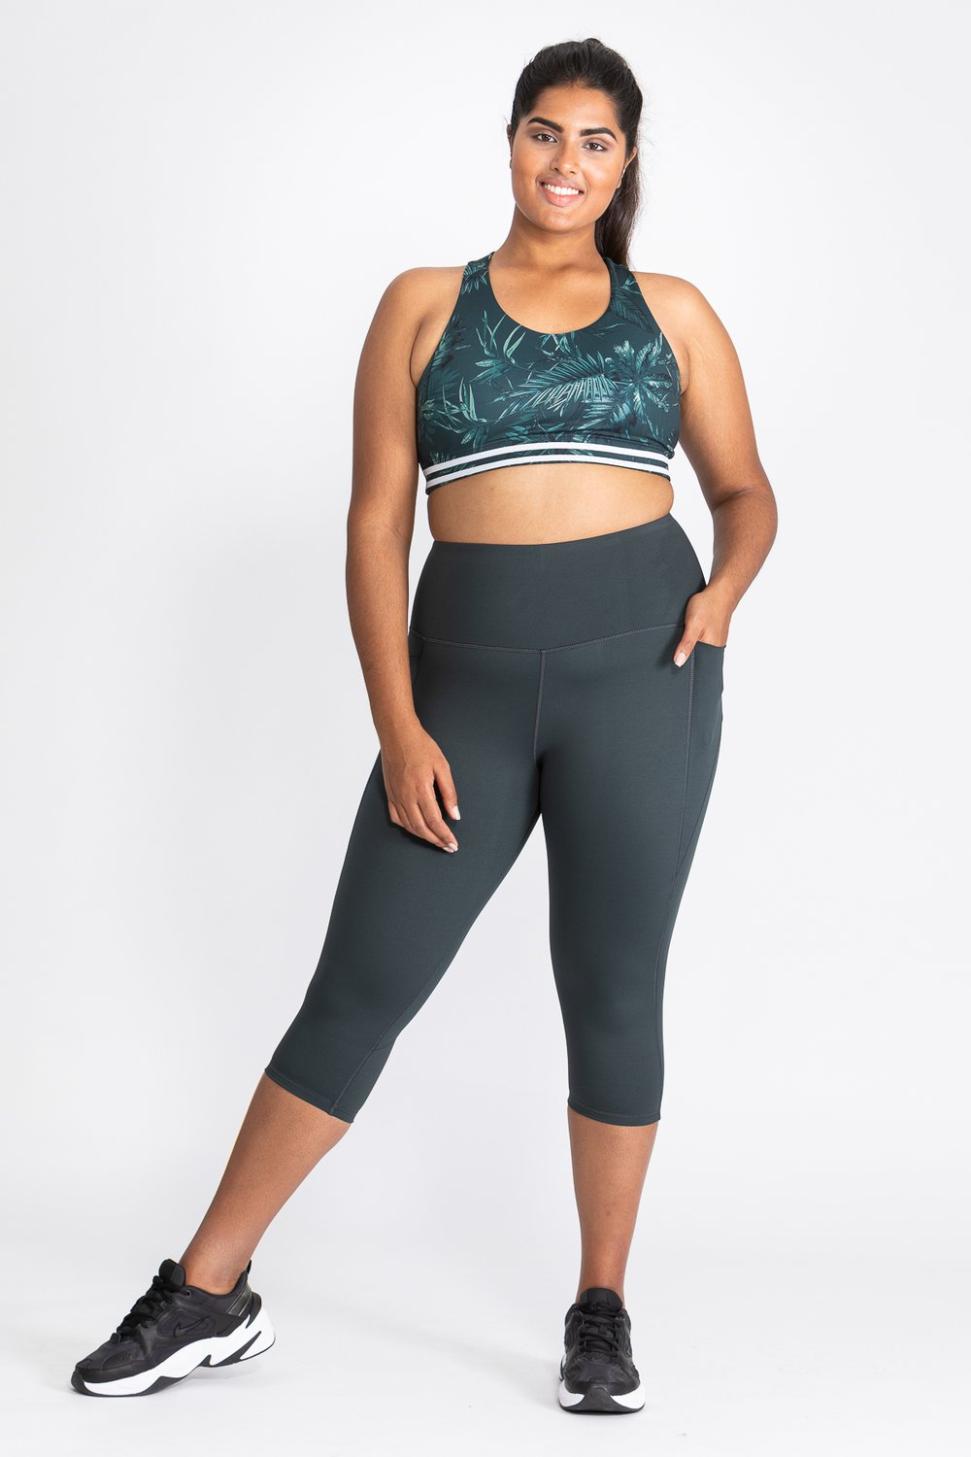 How Can I Find Activewear That Is Both Stylish And Functional?